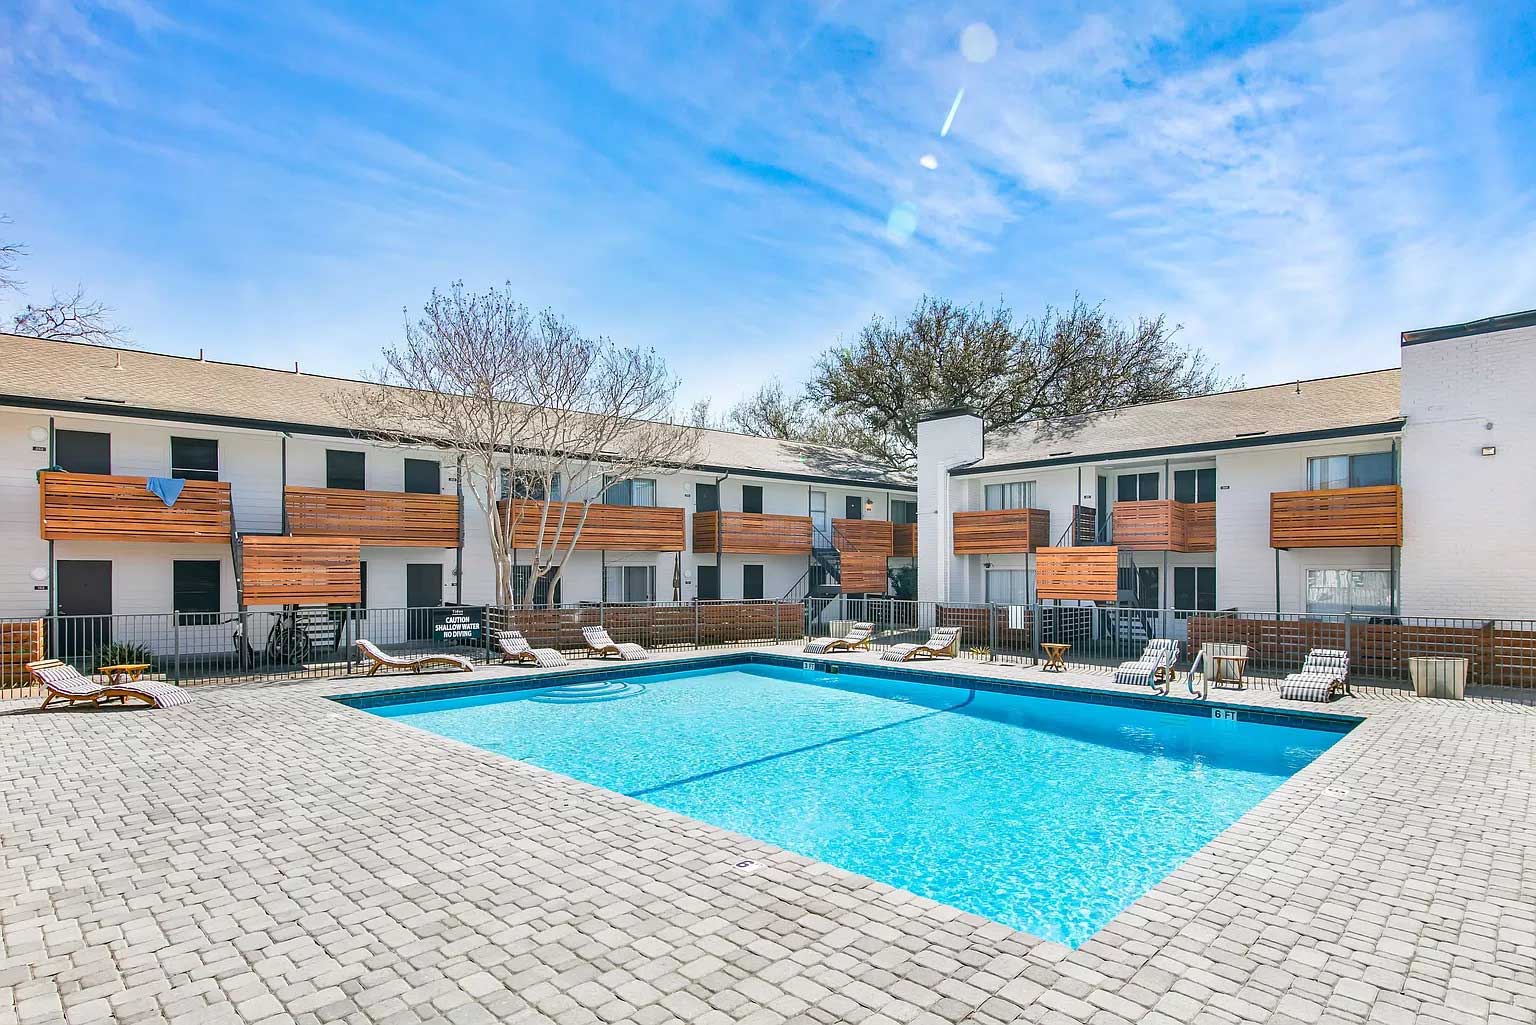 Spacious Community Pool Area with Large Poolside